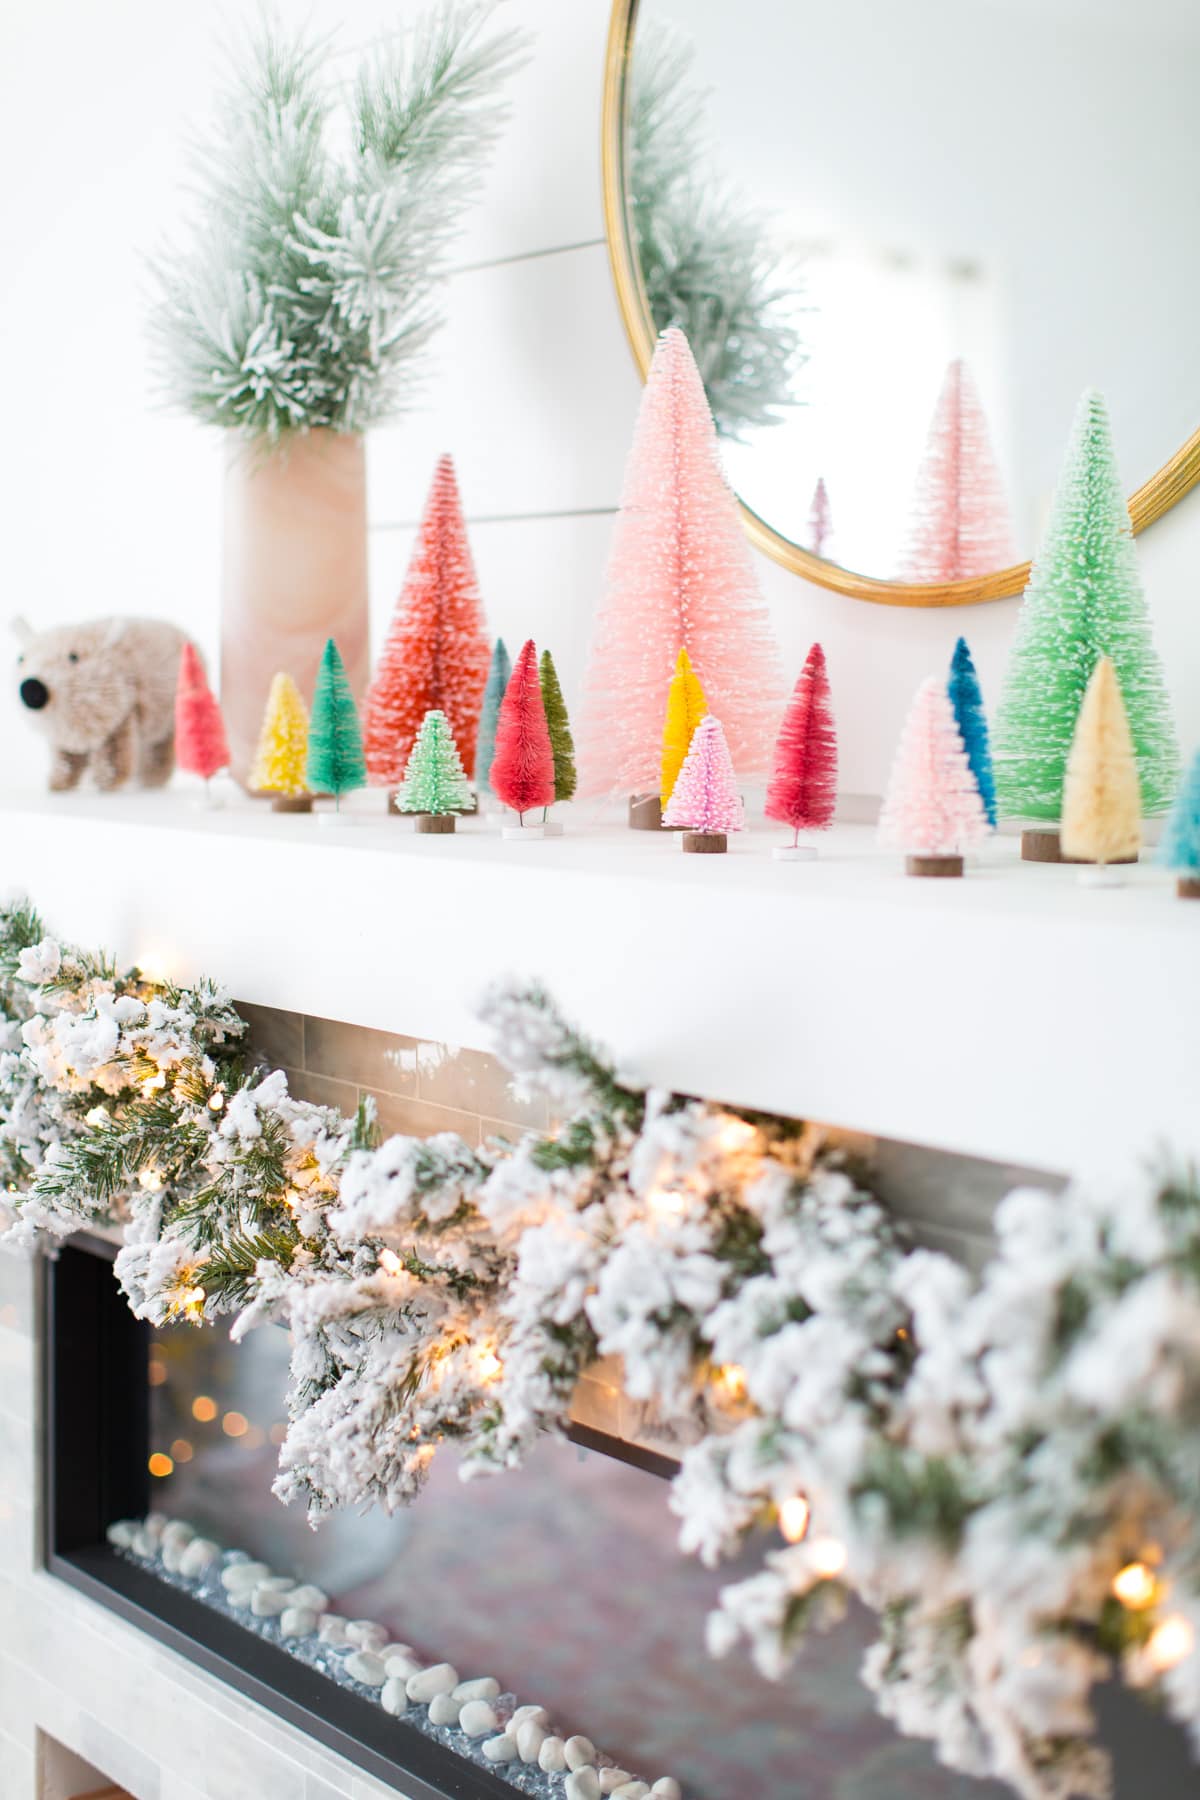 How We Decorated our Home for Christmas! by top Houston lifestyle blogger Ashley Rose of Sugar & Cloth